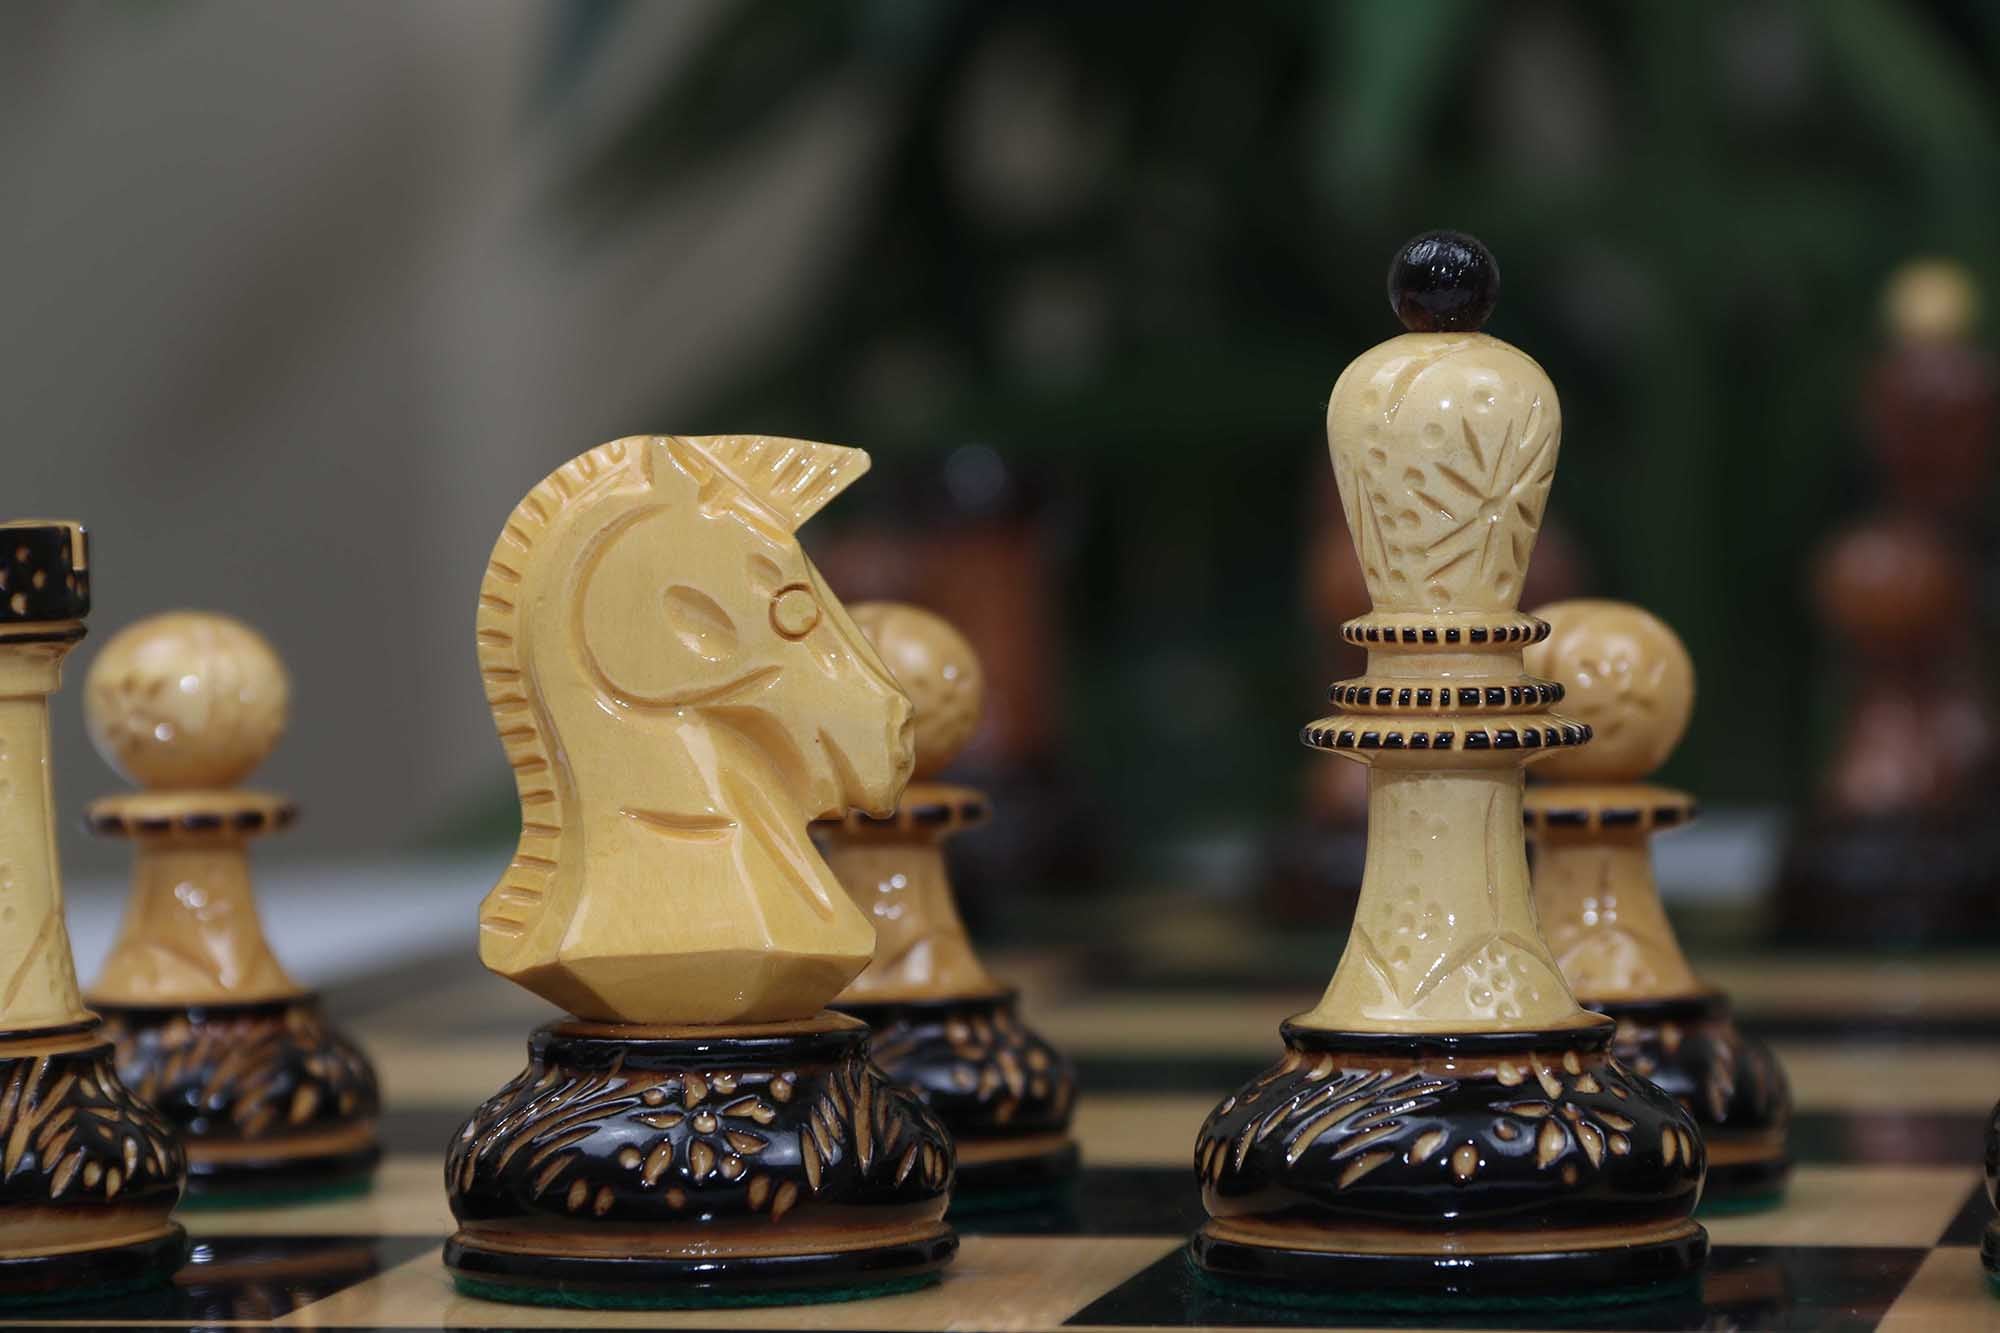 Dubrovnik Chess Pieces in Golden Rosewood Reproduction of 